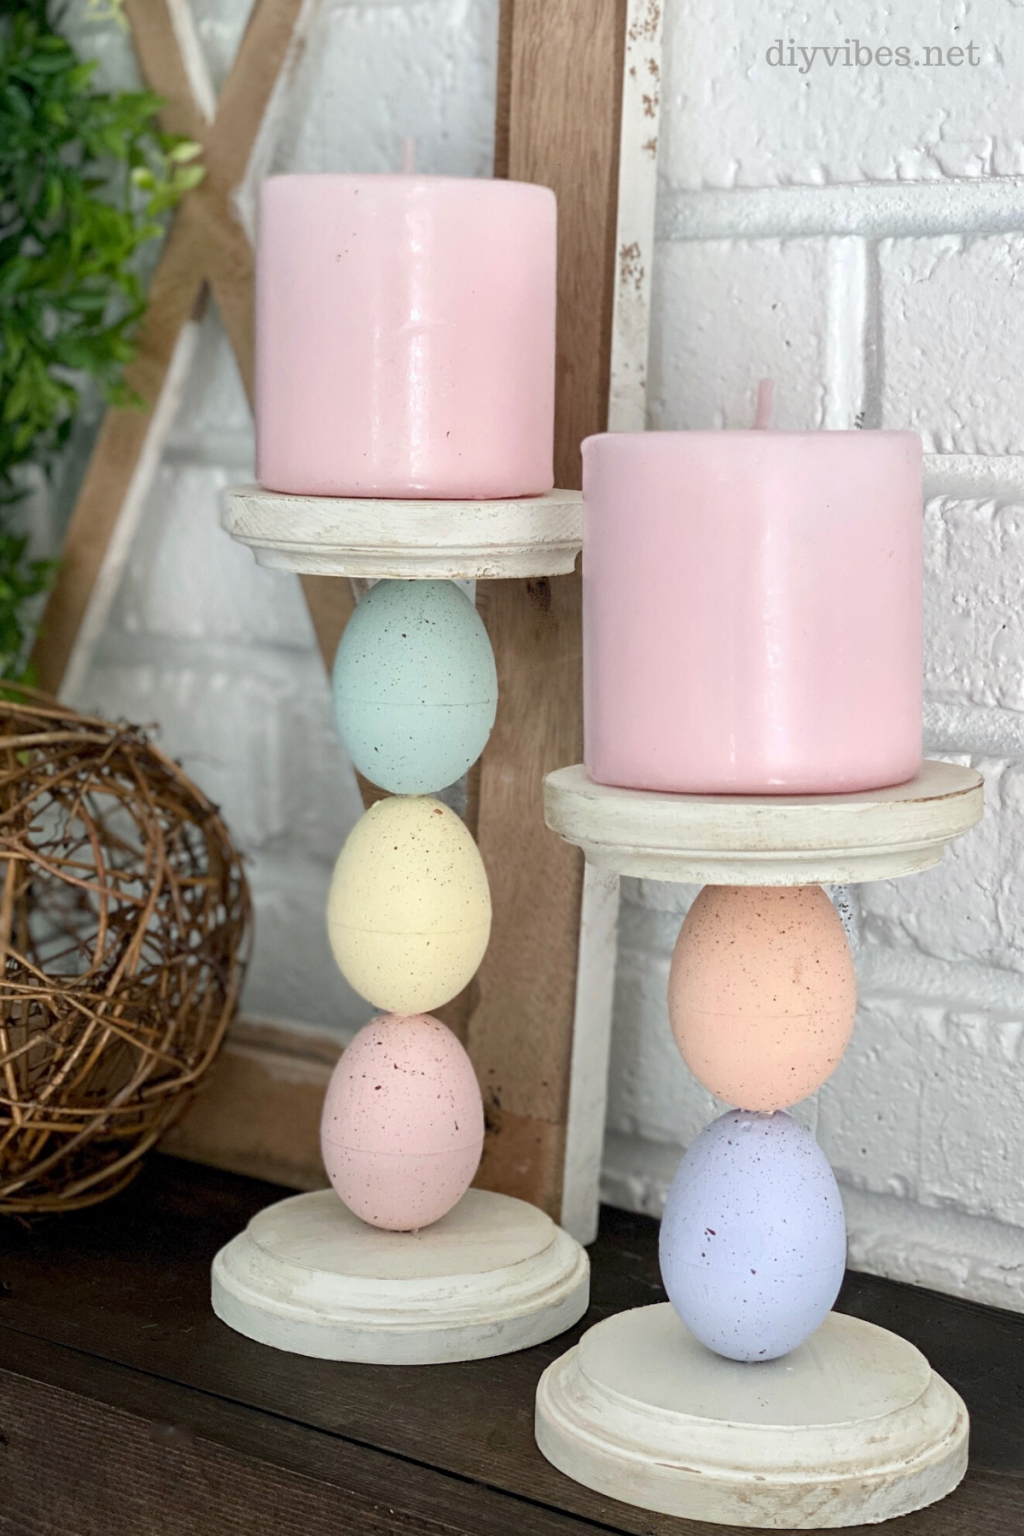 15 Easter Decor Ideas That You Can Make Yourself
